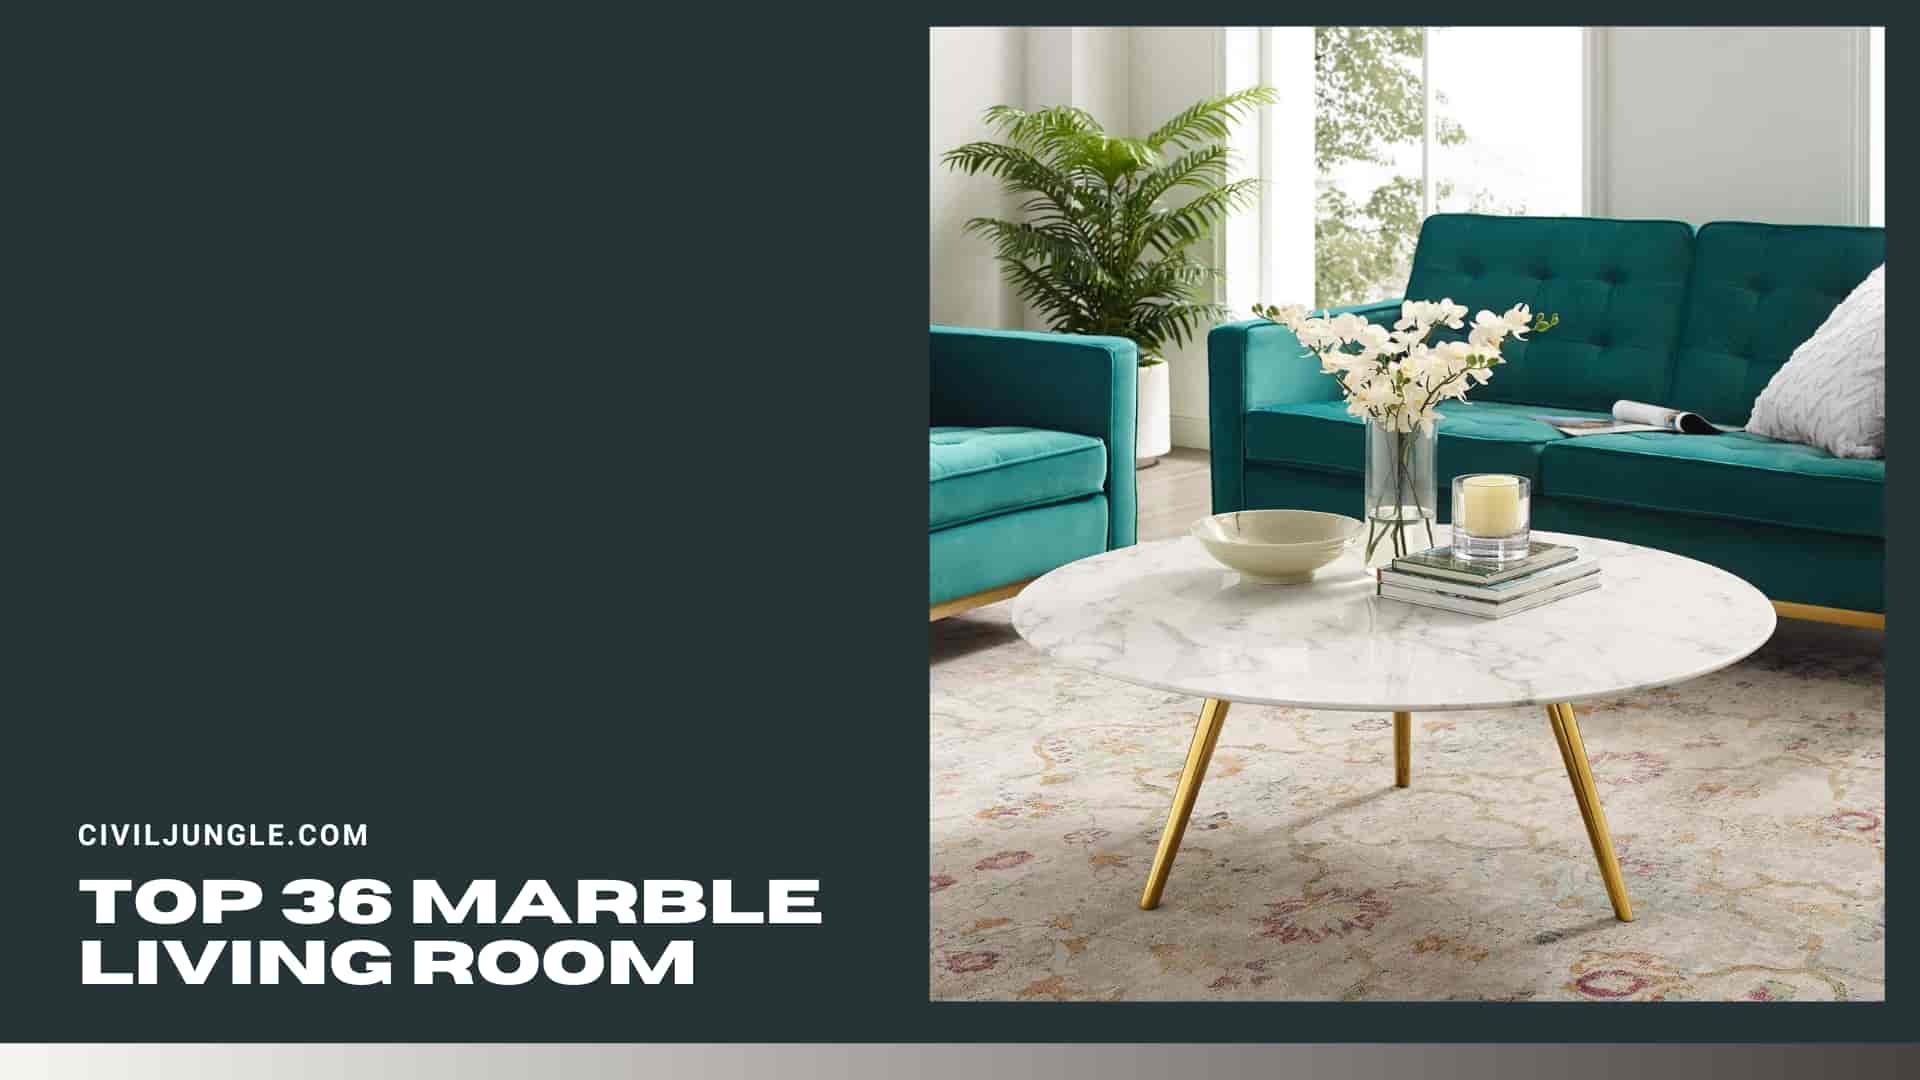 Top 36 Marble Living Room